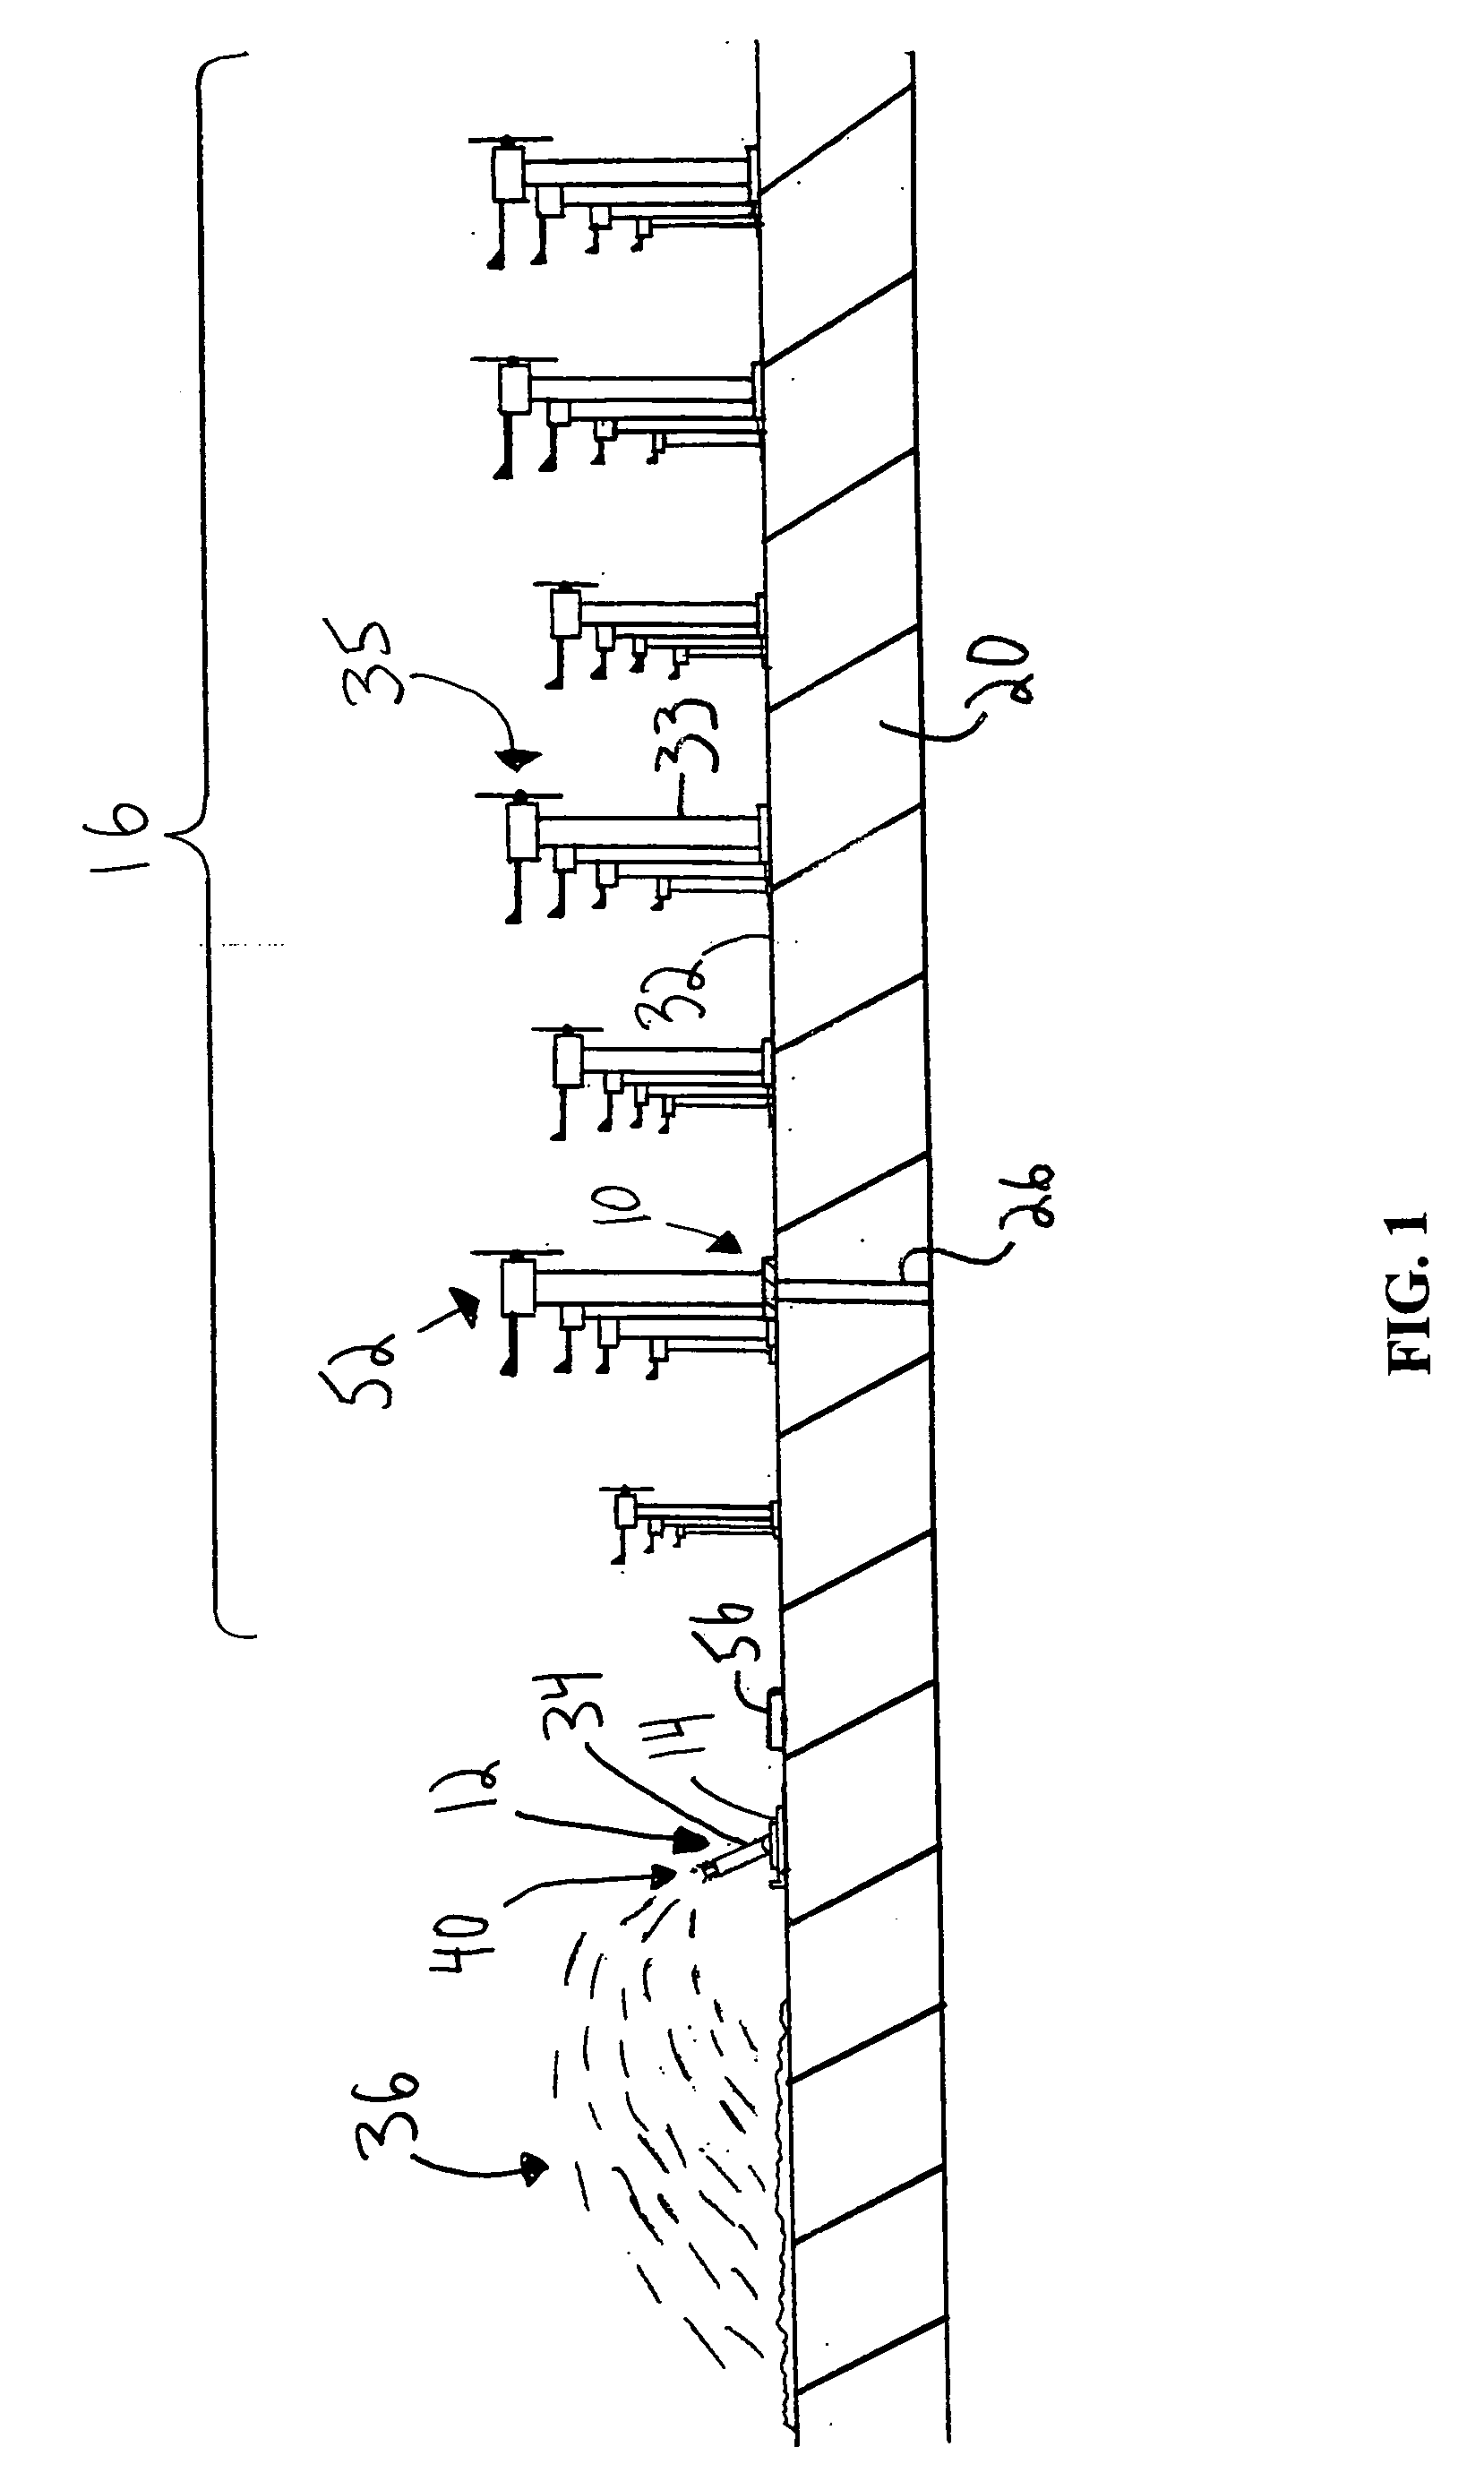 Apparatus and method for the prevention of polar ice mass depletion